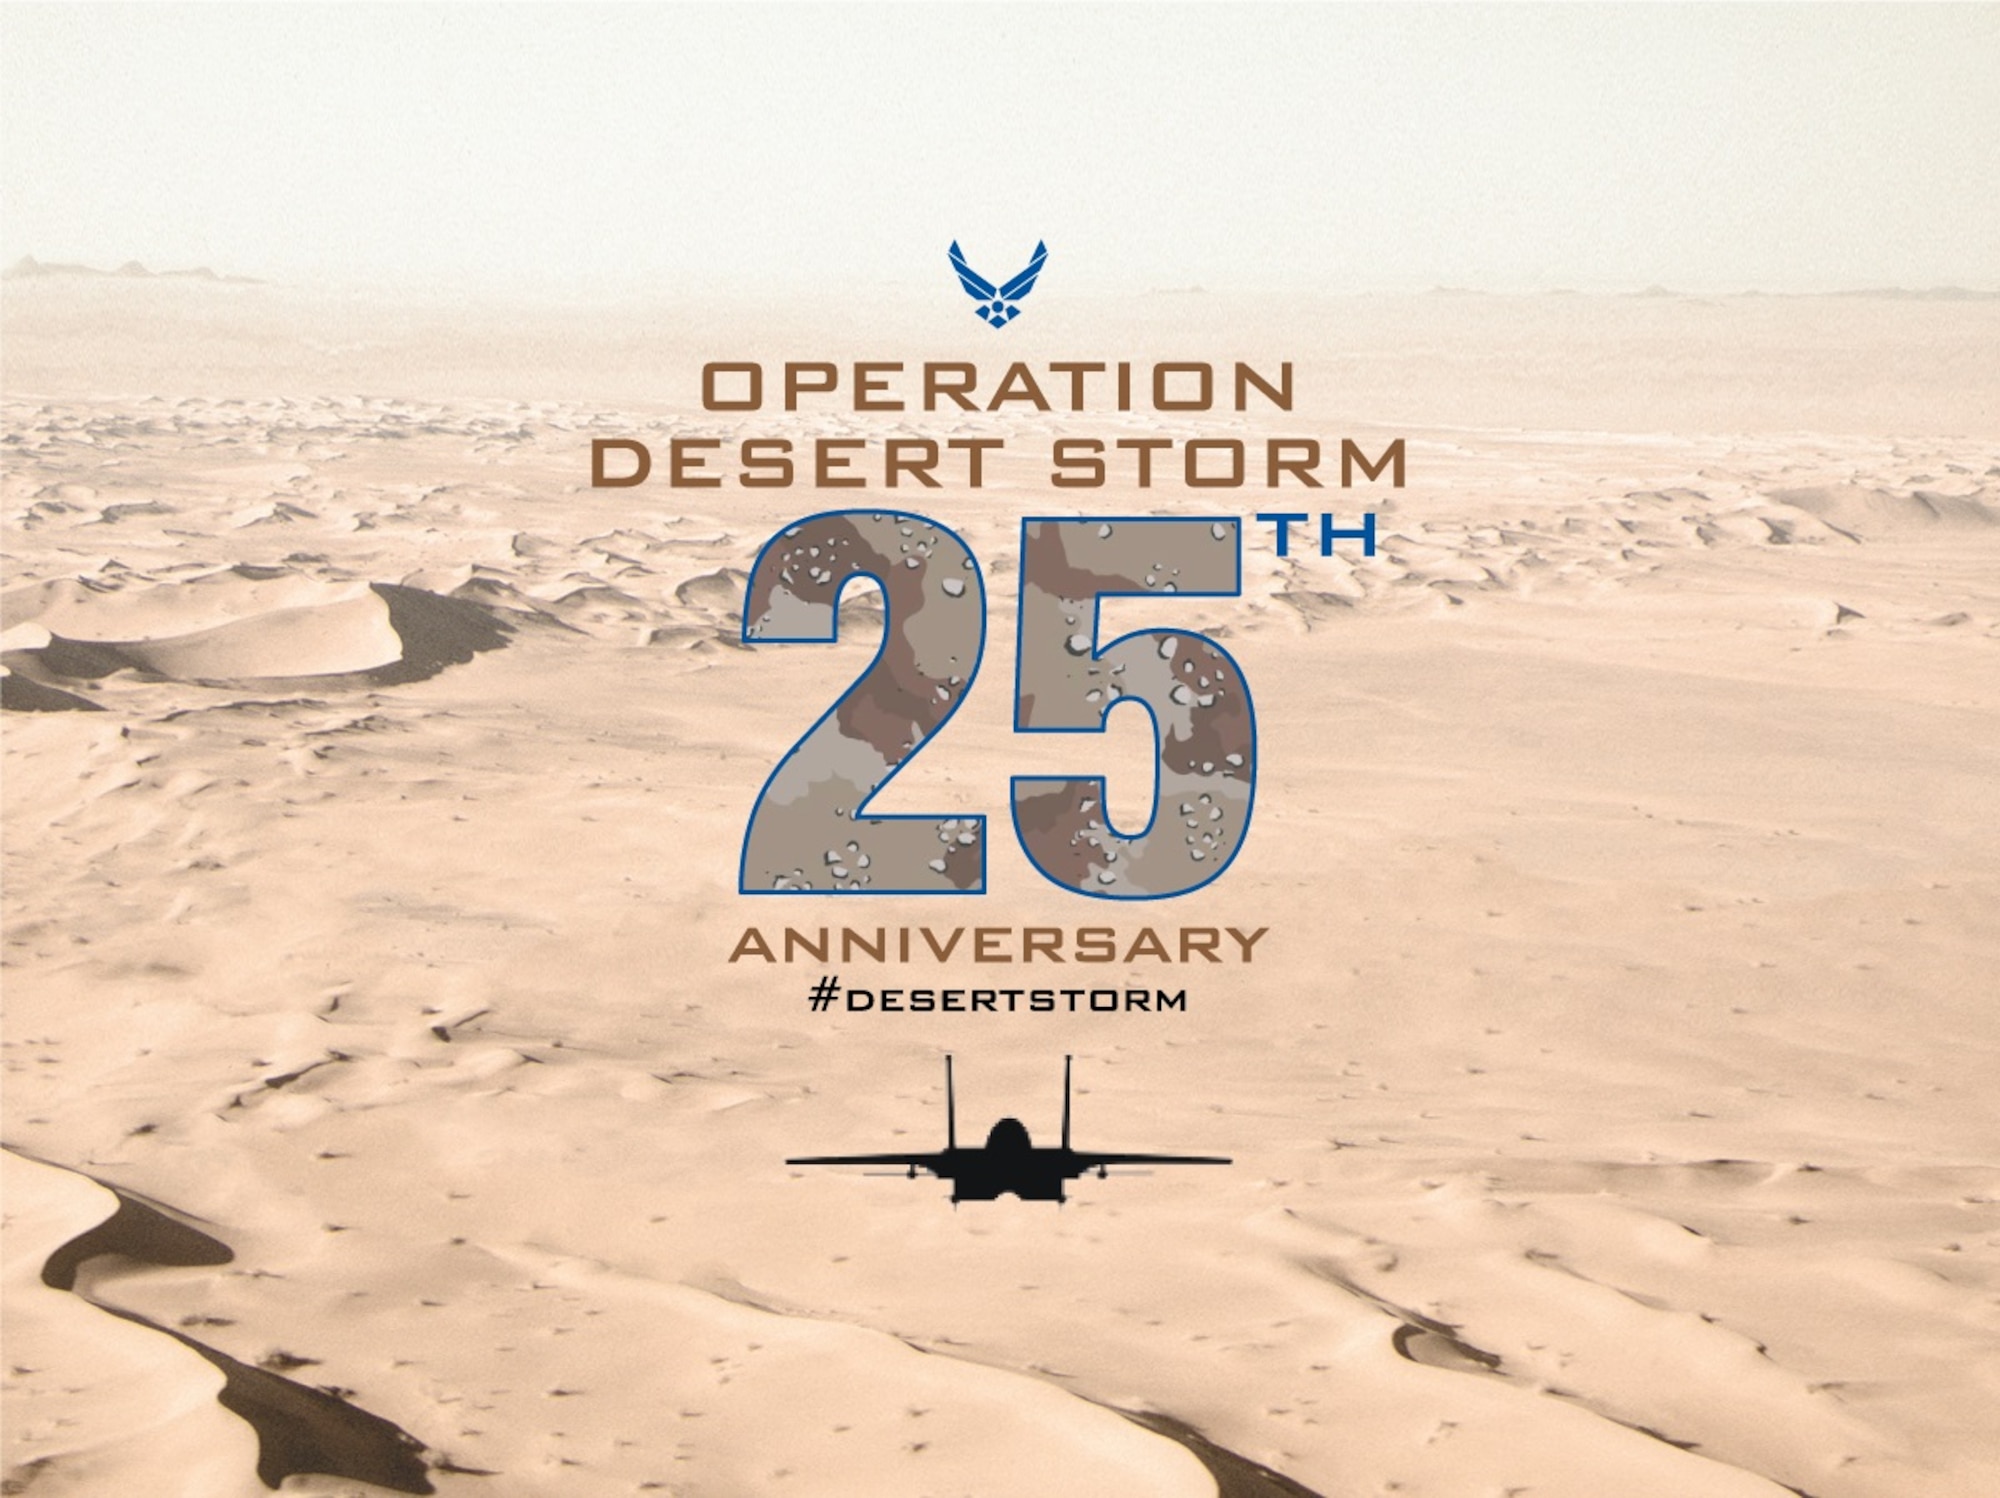 Operation DESERT STORM began the evening of January 17, 1991. Airmen and F-15E Strike Eagle aircraft from the 335th and 336th Fighter Squadrons deployed to defeat Saddam Hussein's forces. (U.S. Air Force graphic)